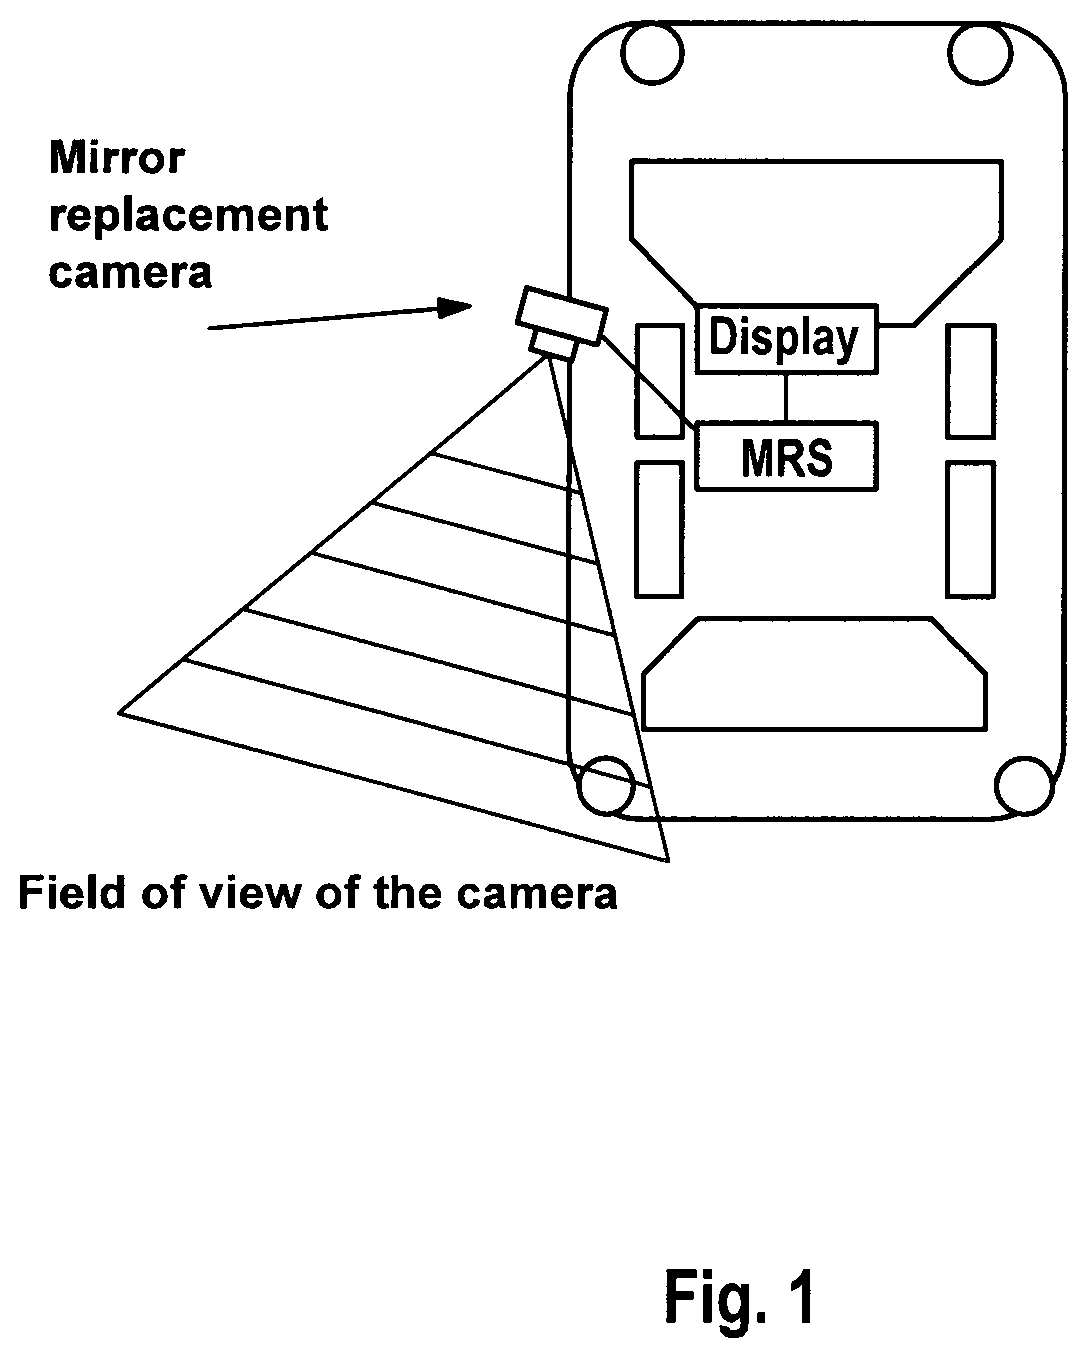 Apparatus and method for checking the playback of a video sequence of a mirror replacement camera